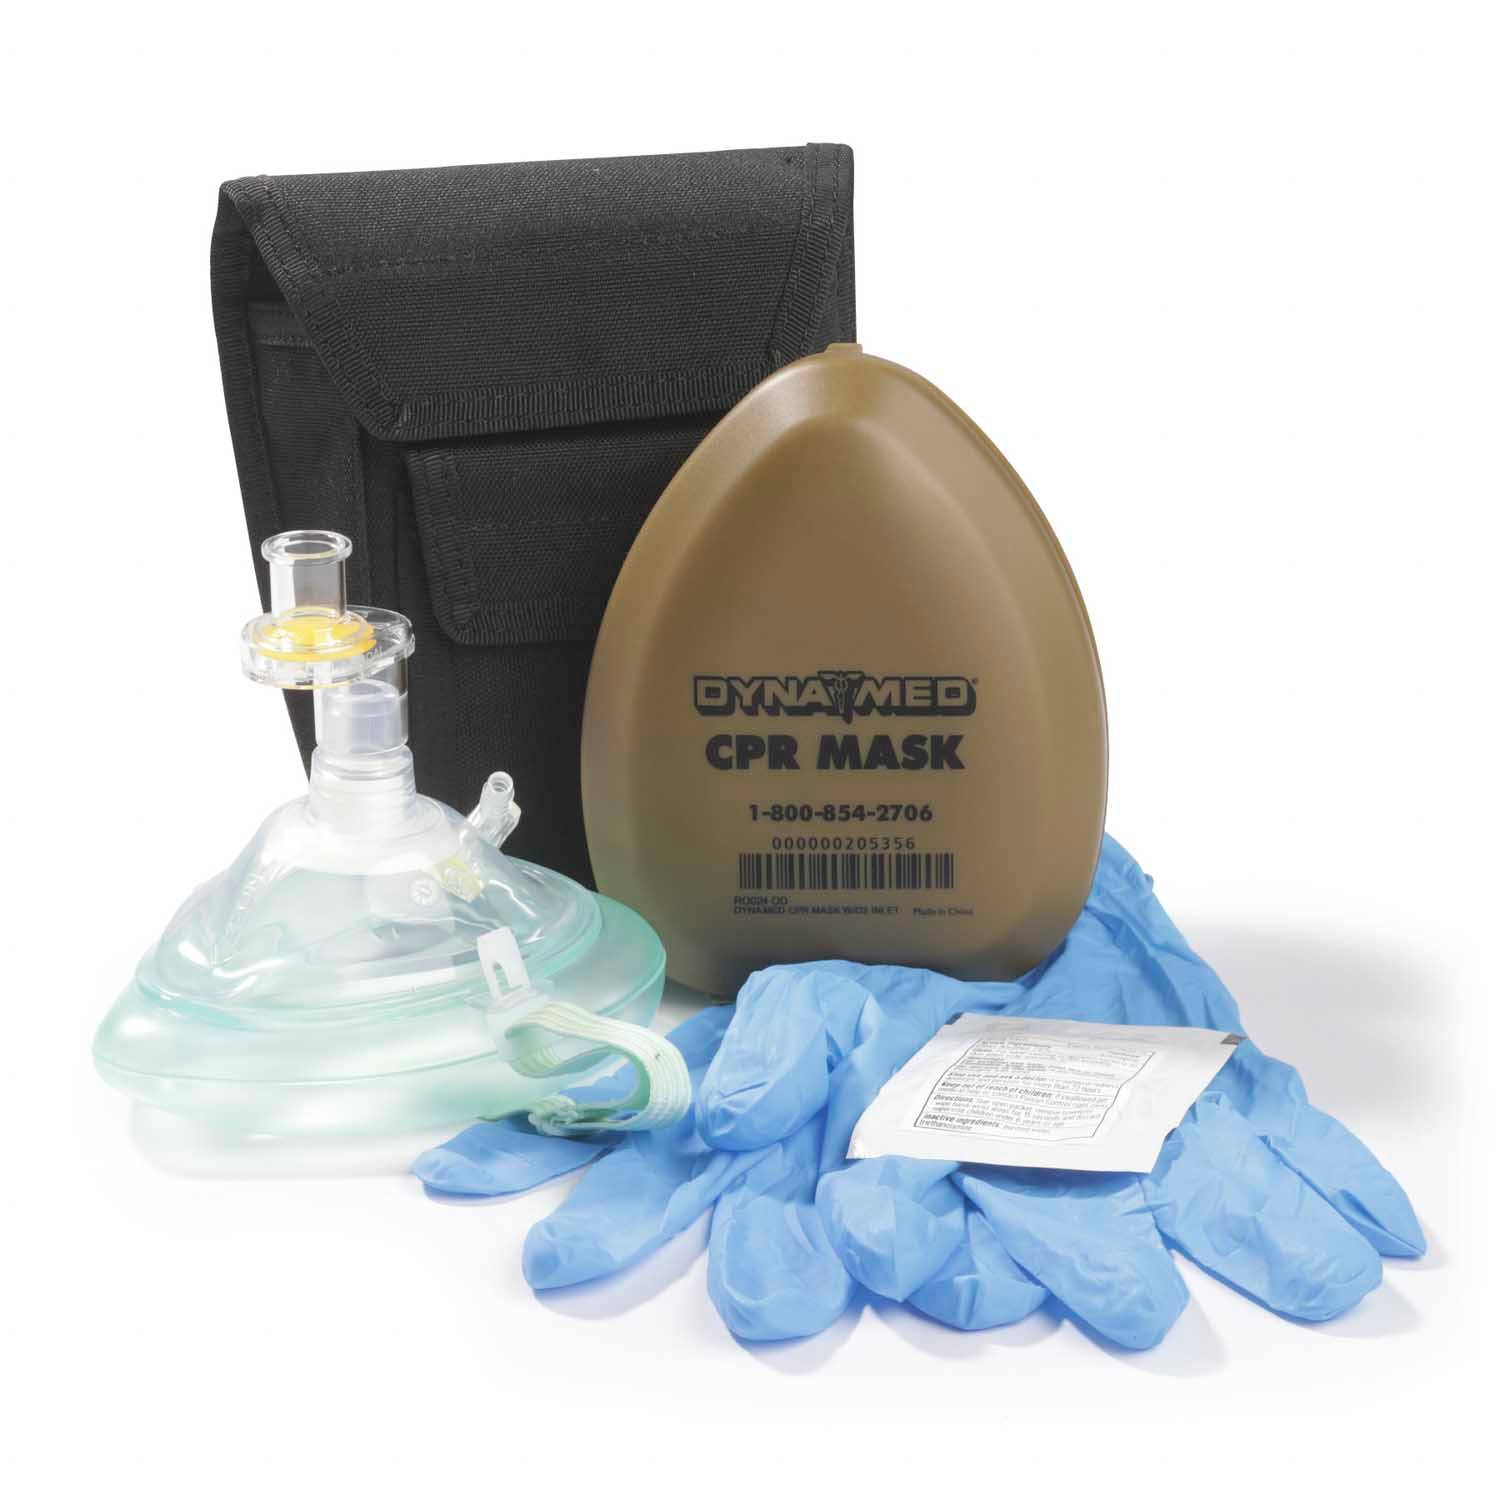 DYNA MED CPR MASK HOLSTER KIT WITH O2 INLET